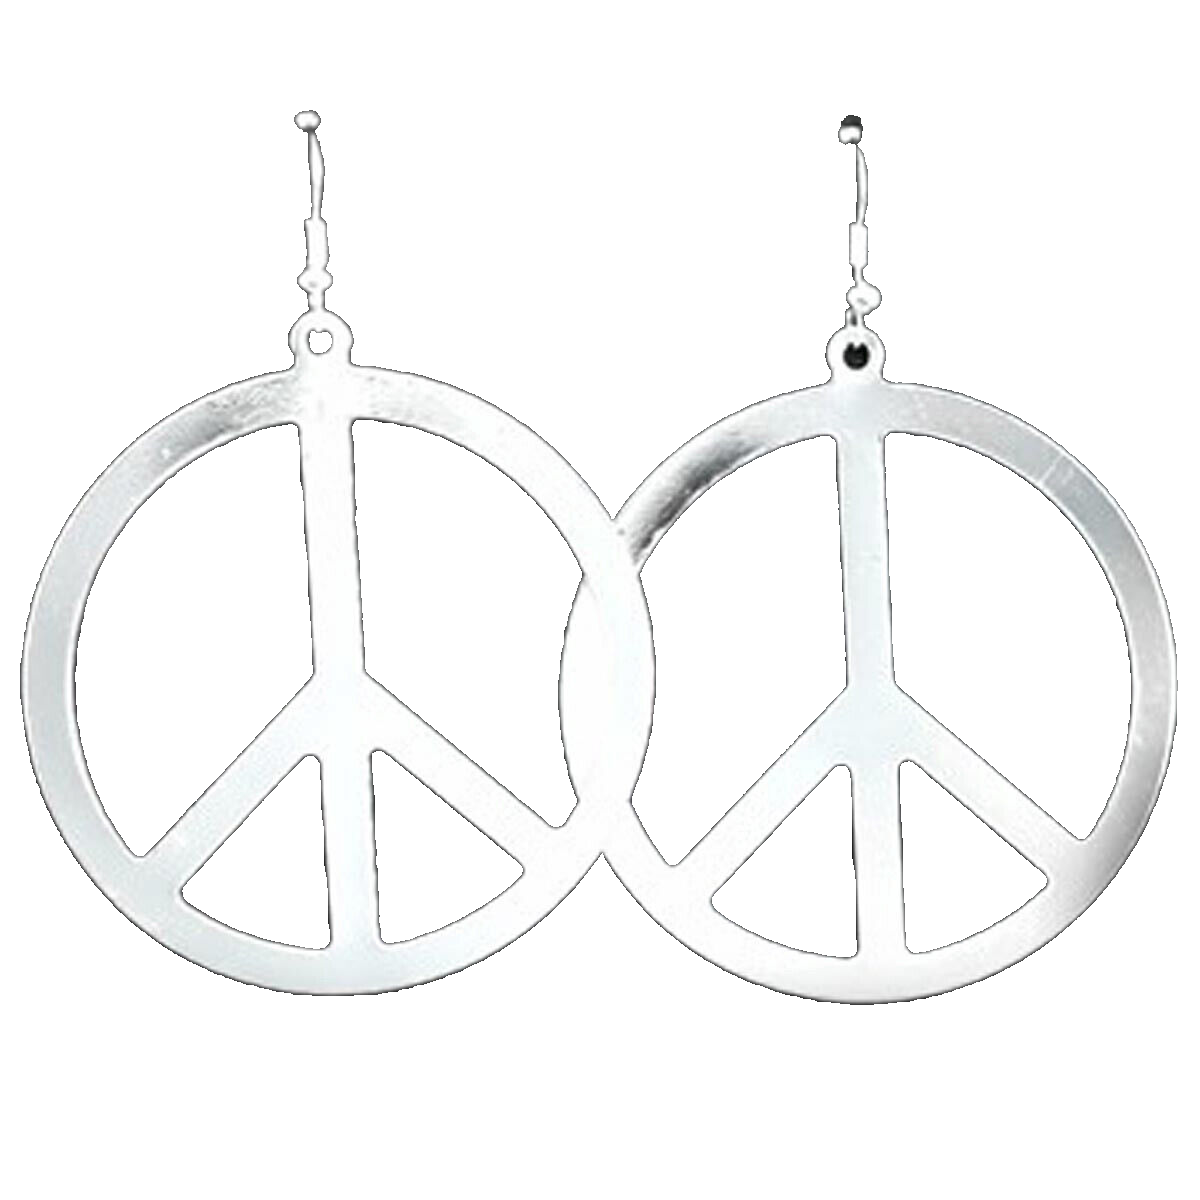 Big Funky Vintage PEACE SIGN EARRINGS Retro Hippy Costume Jewelry - SILVER Metal - £7.02 GBP